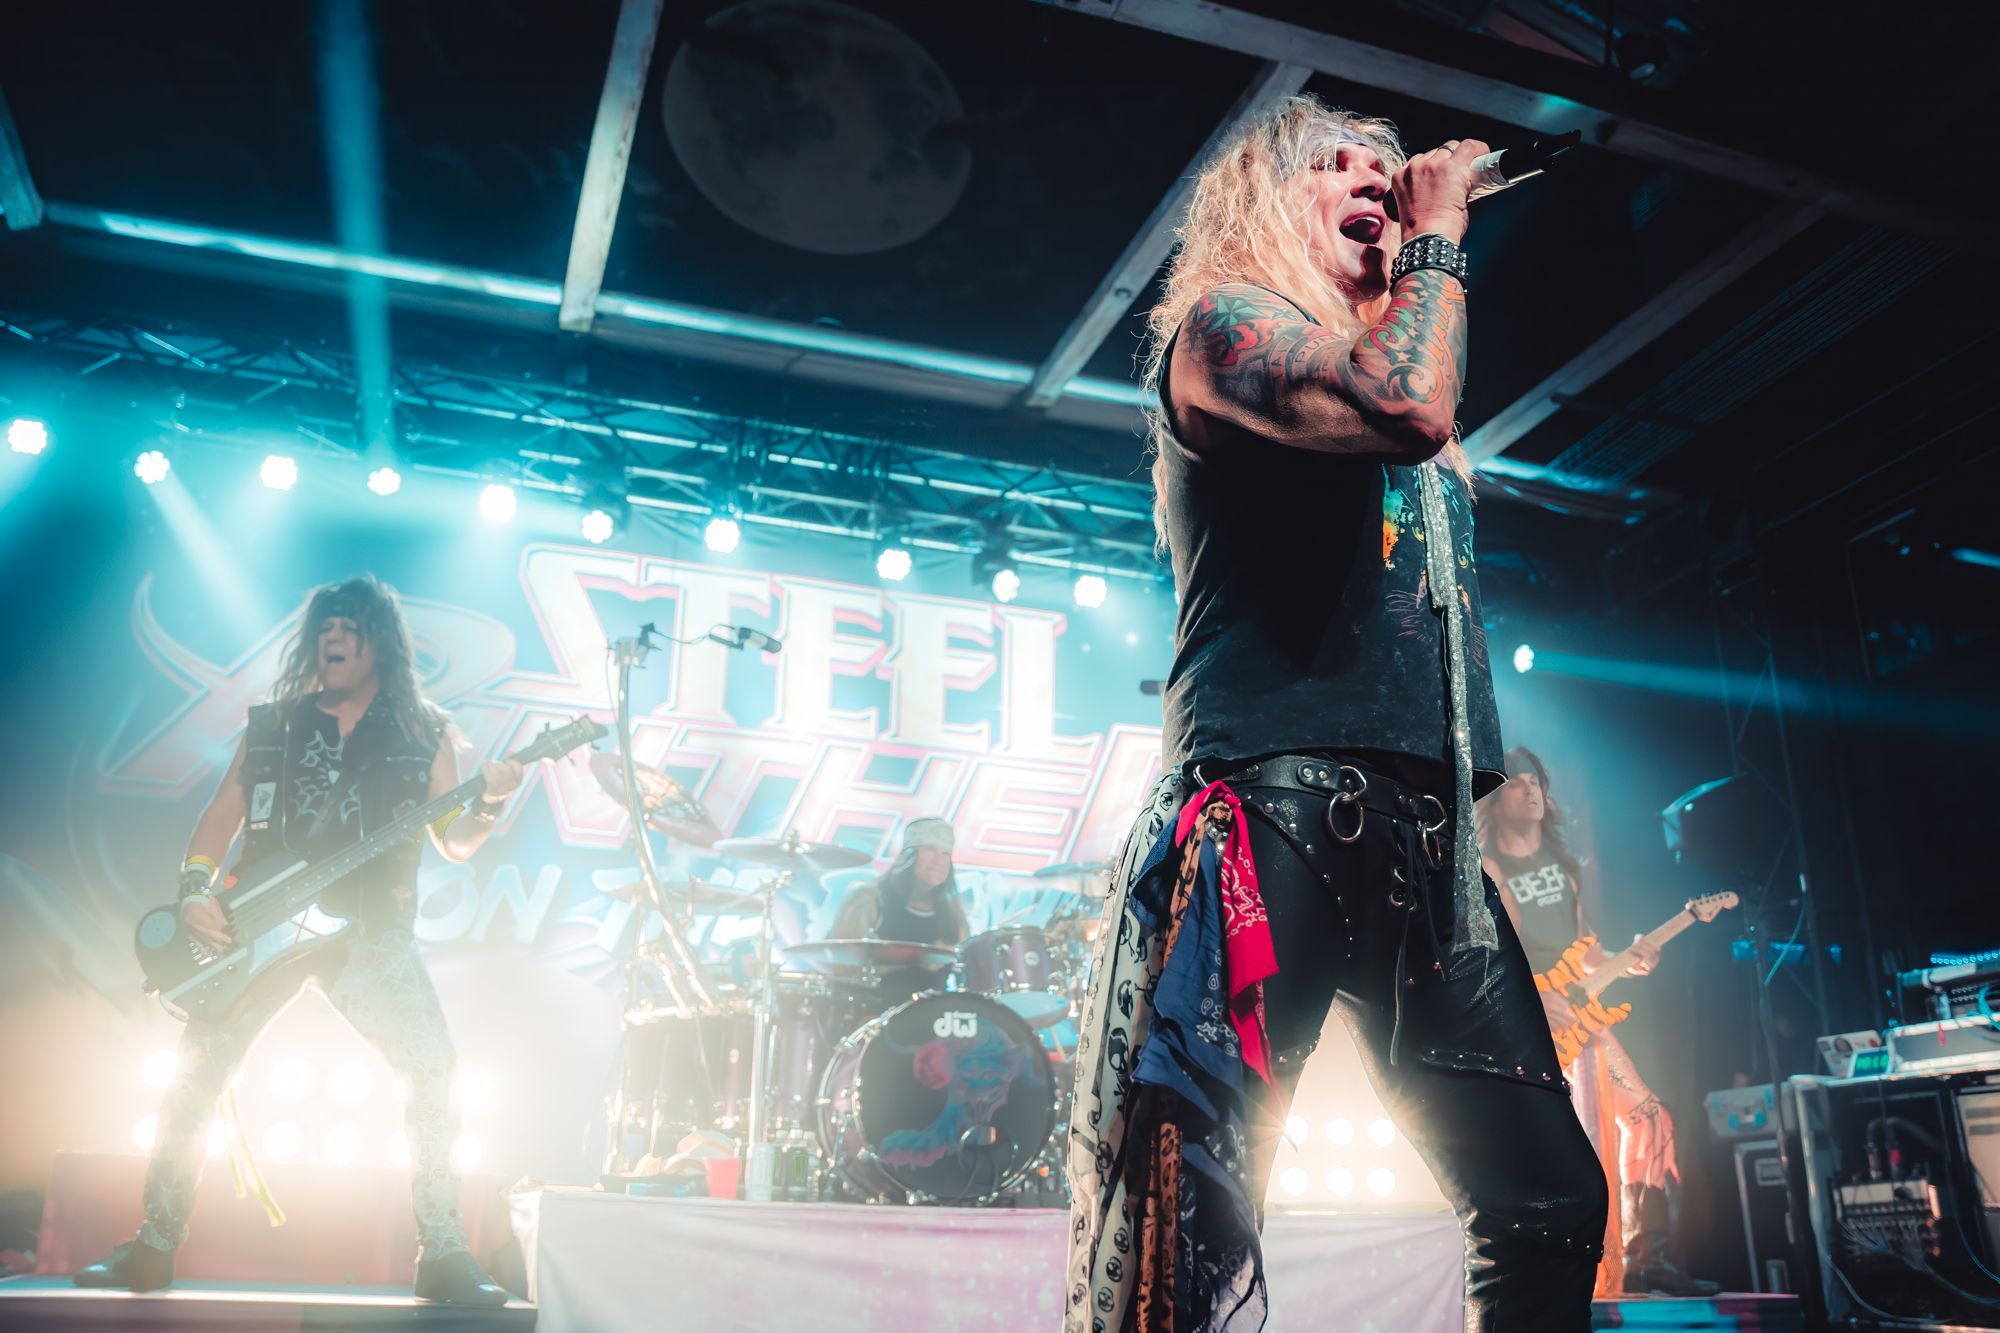 Steel Panther unleashes a neon jungle on the Music Farm